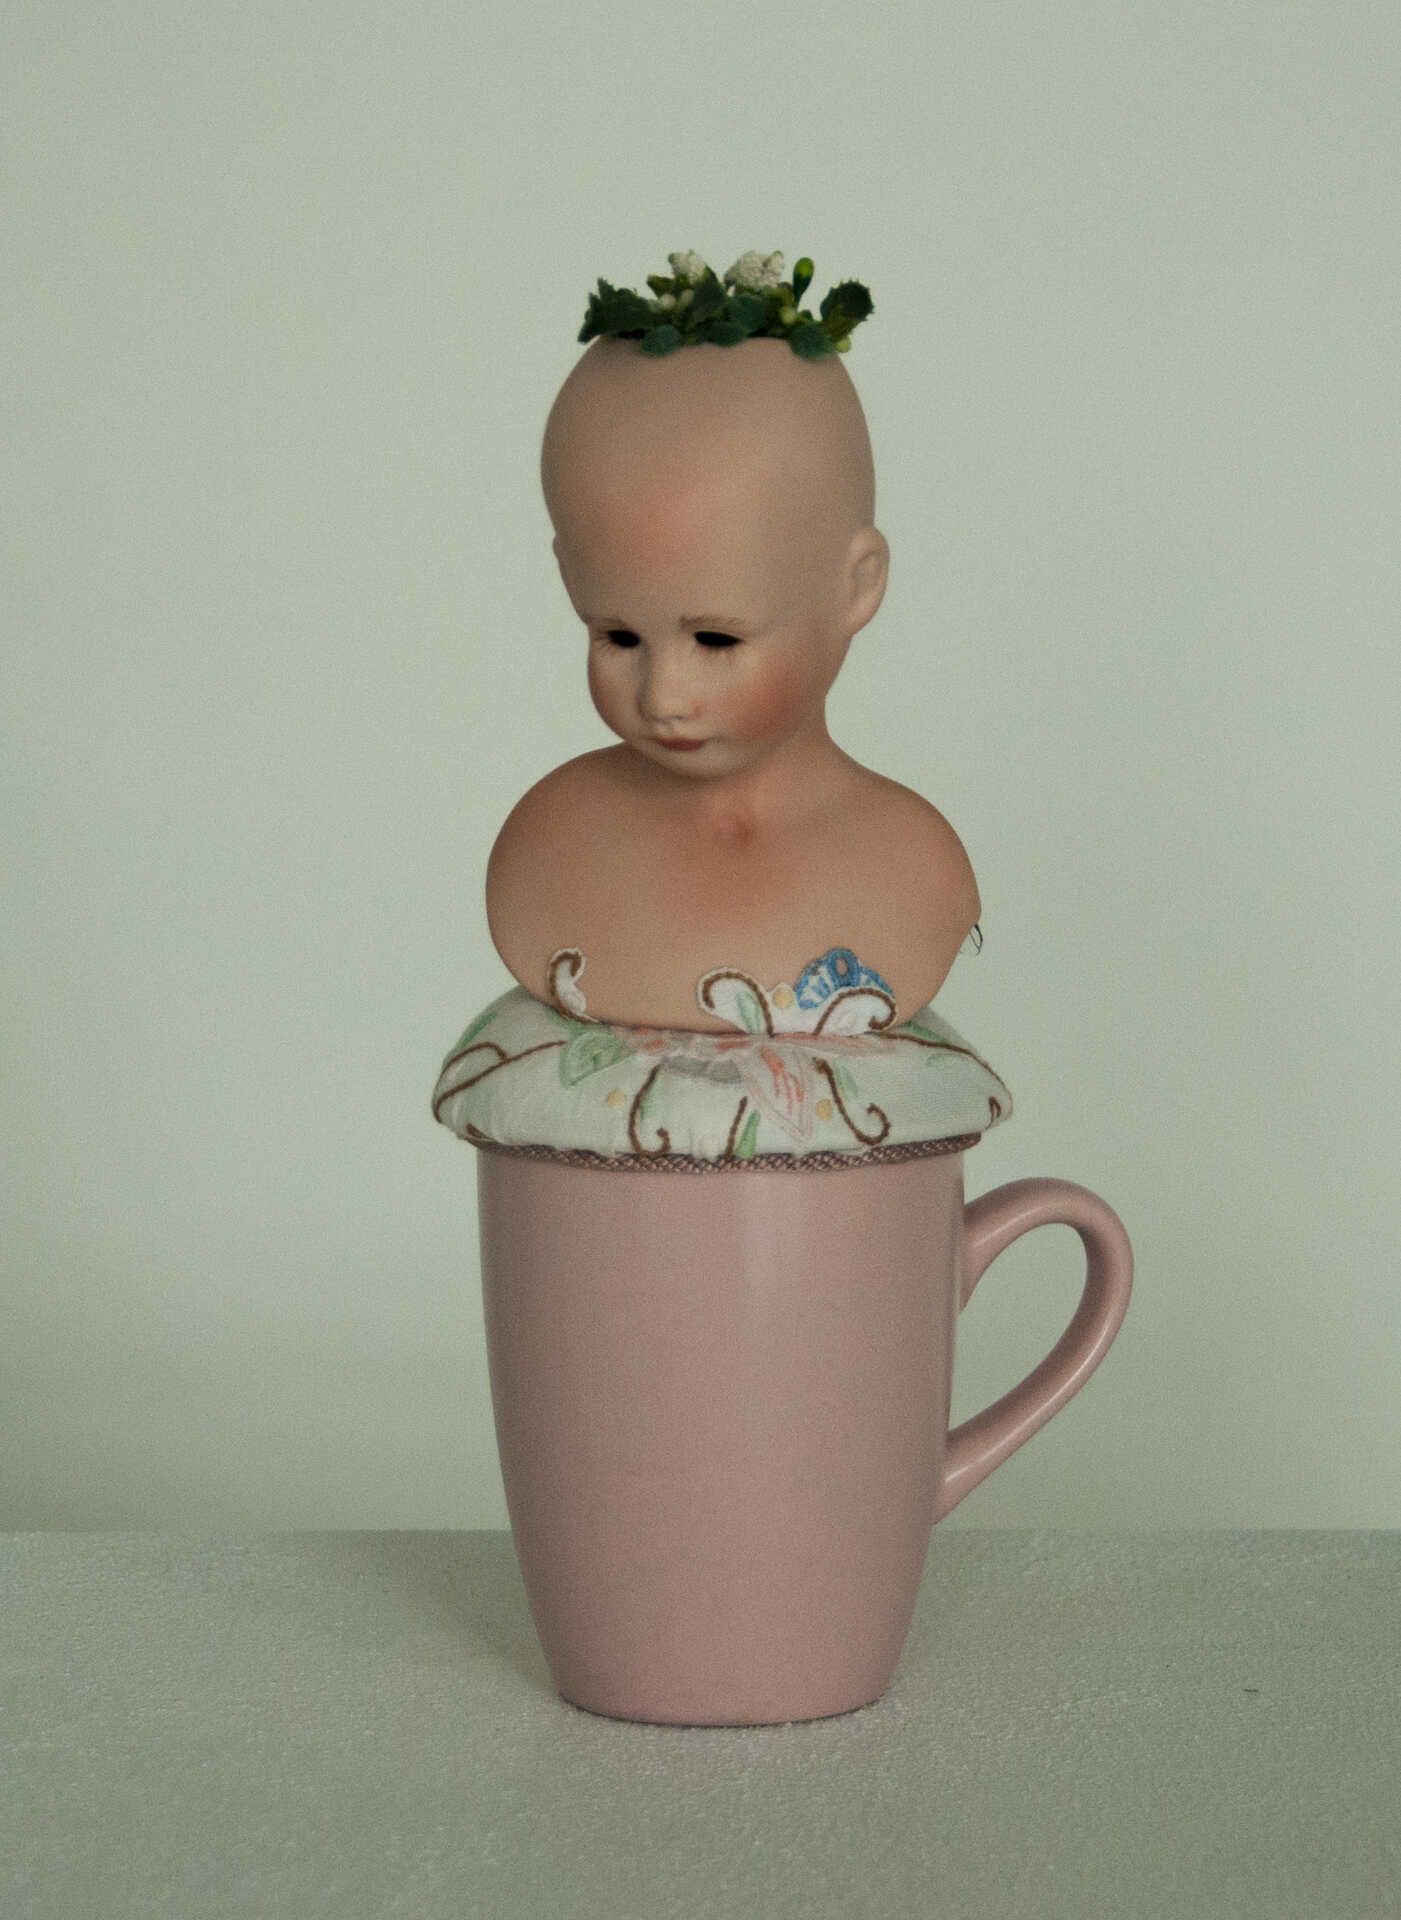 Sculpture "Finding the Way Back I" by Libby Bloxham. The head and shoulders of a porcelain doll are posed atop a rose pink drinking mug, on a round white fabric cushion with an embroidered flower pattern. The doll has no hair affixed, but a small cluster of flower buds sprout from her crown. Her pose is demure, her eyes cast slightly downward; from the angle she is photographed you can barely see a tiny pair of acetate insect wings growing from her back.